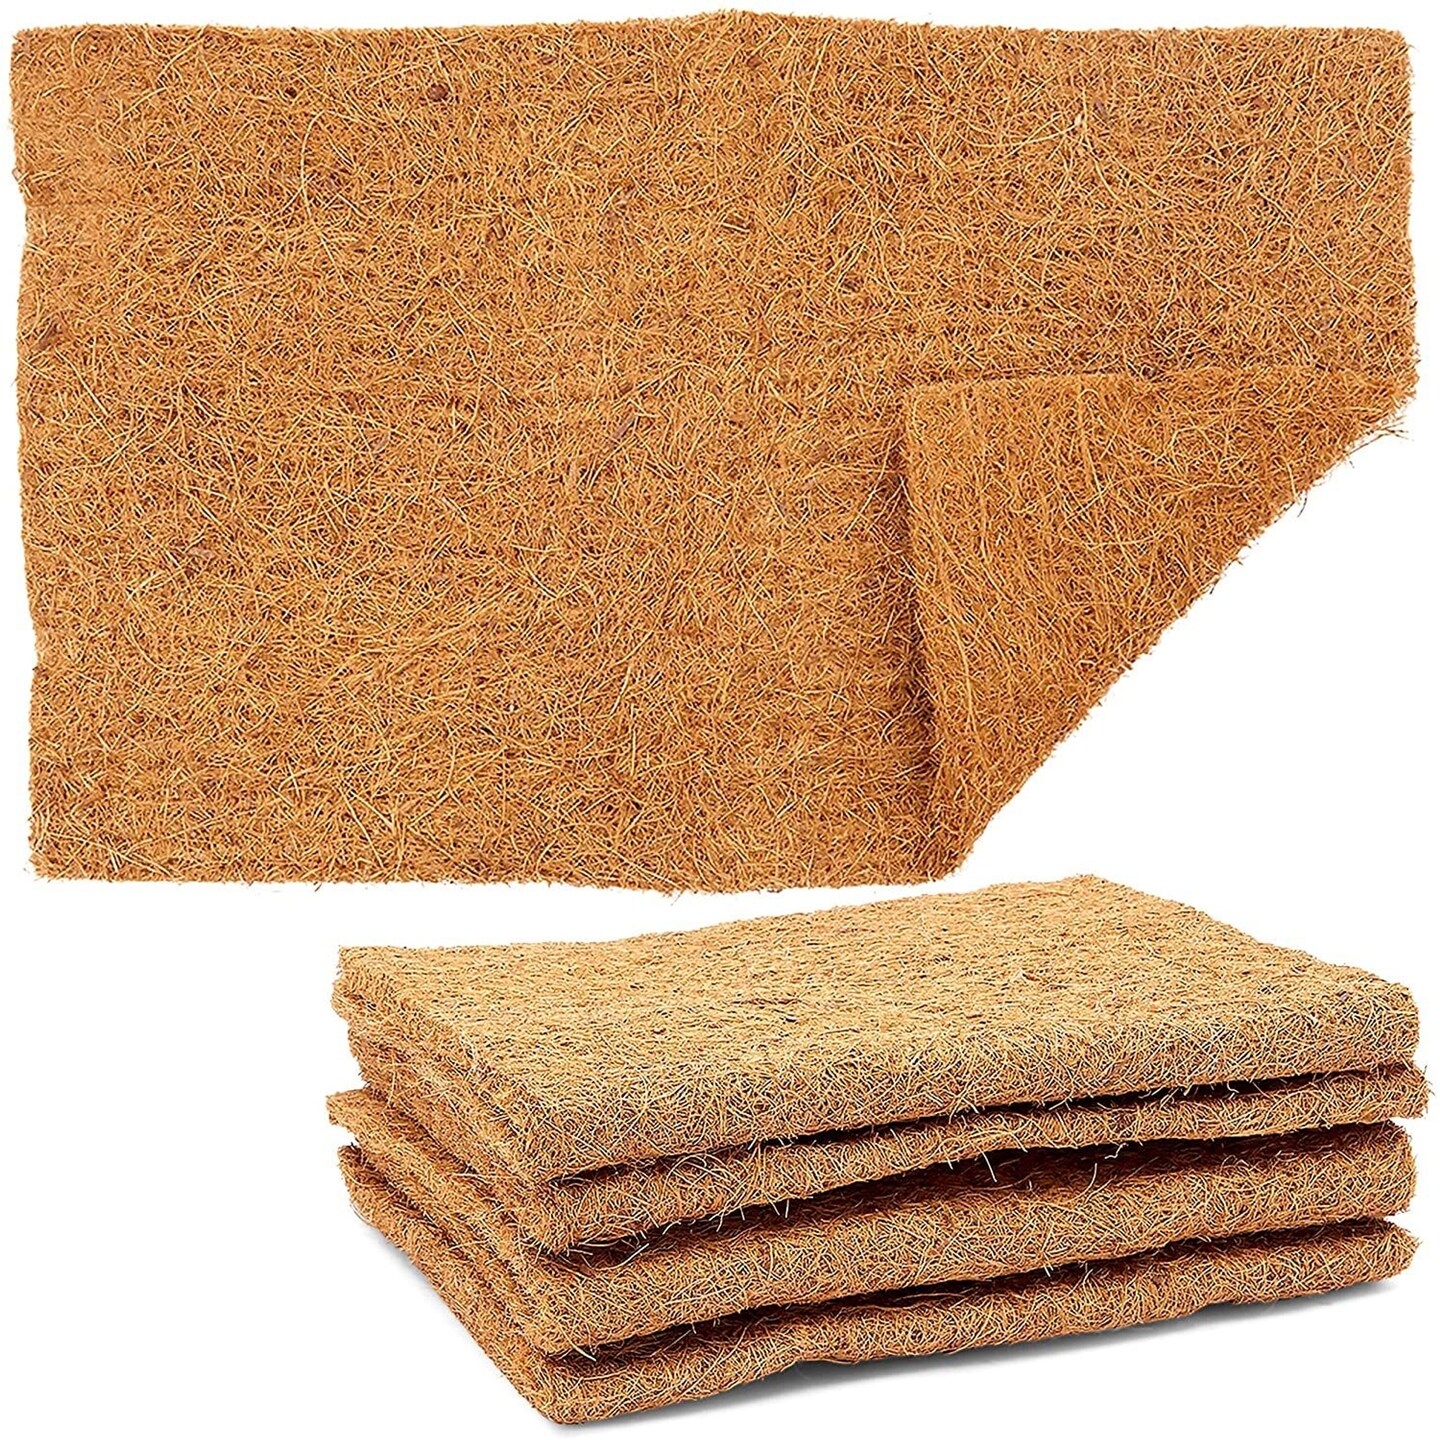 4-Pack Coco Fiber Substrate Mats for Small Pets, Natural Coir (12x20 In)